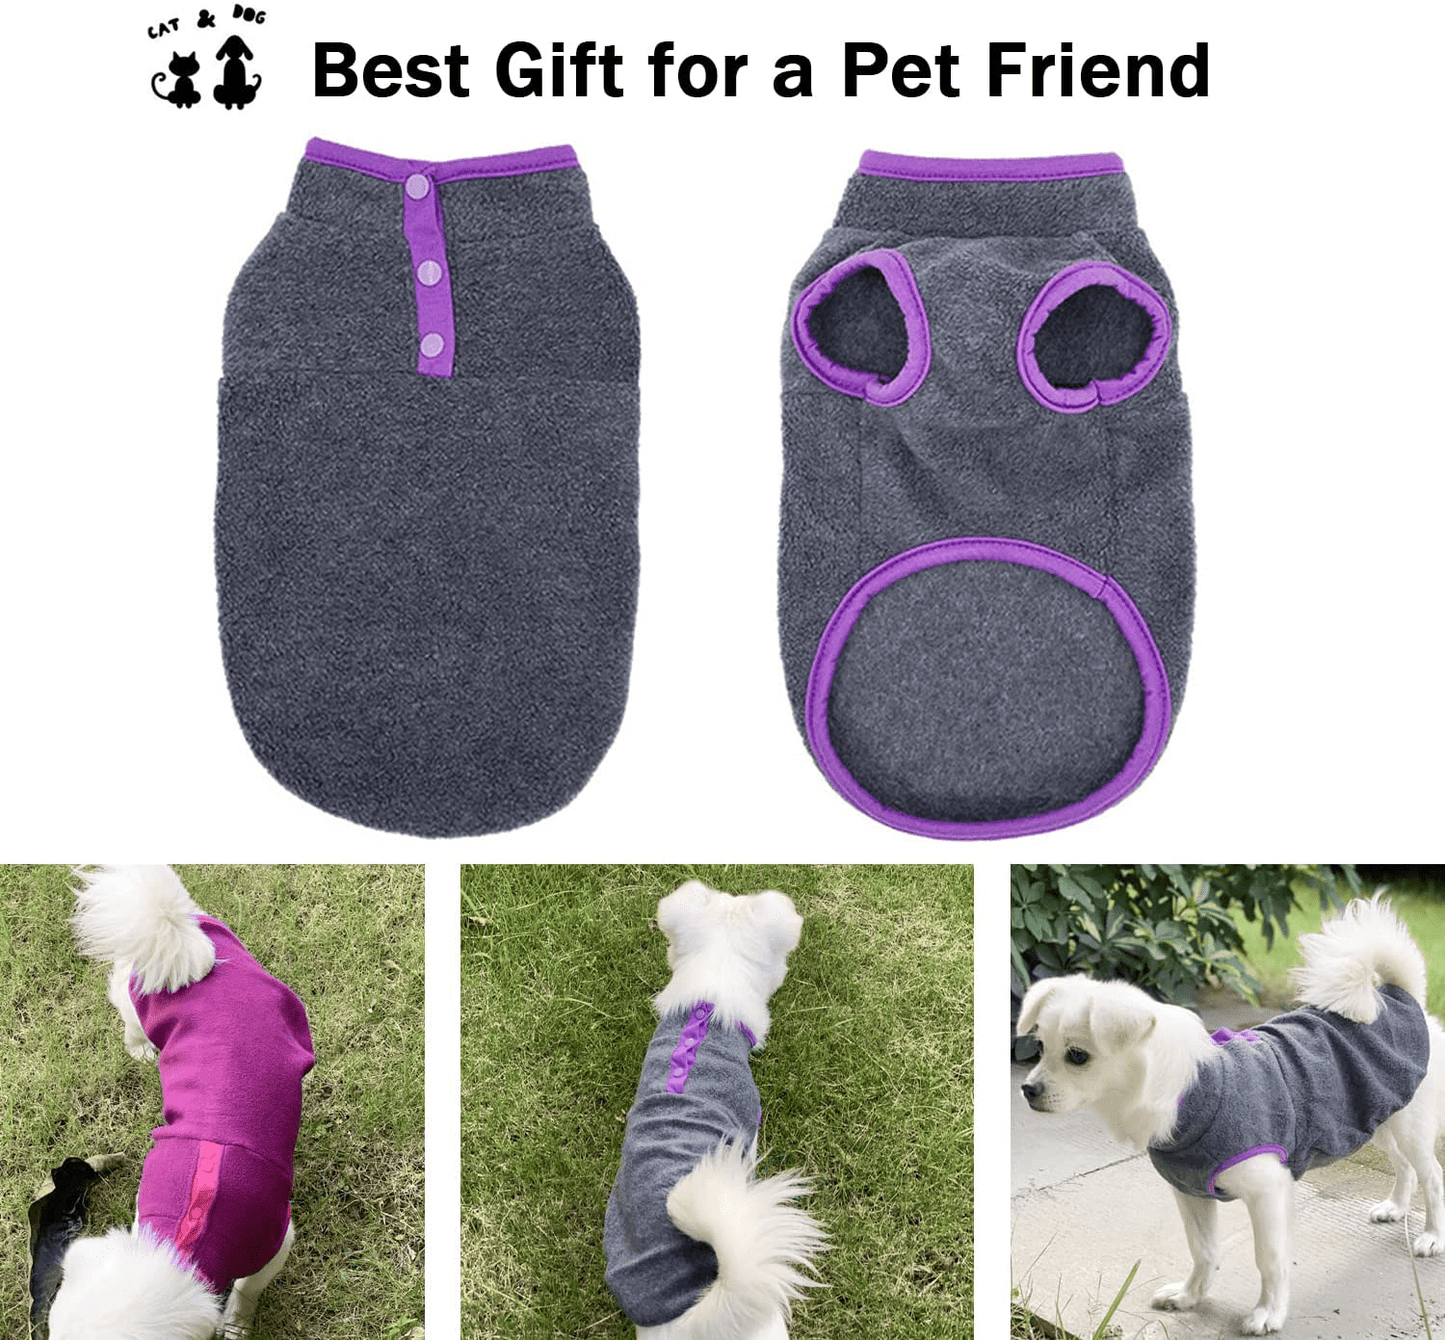 2 Pack Dog Fleece Vest Sweater, Warm Pullover Fleece Puppy Jacket, Autumn Winter Cold Weather Coat Clothes, Pet Stretch Fleece Apparel with Buttons Costumes for Small Medium Dogs Cats